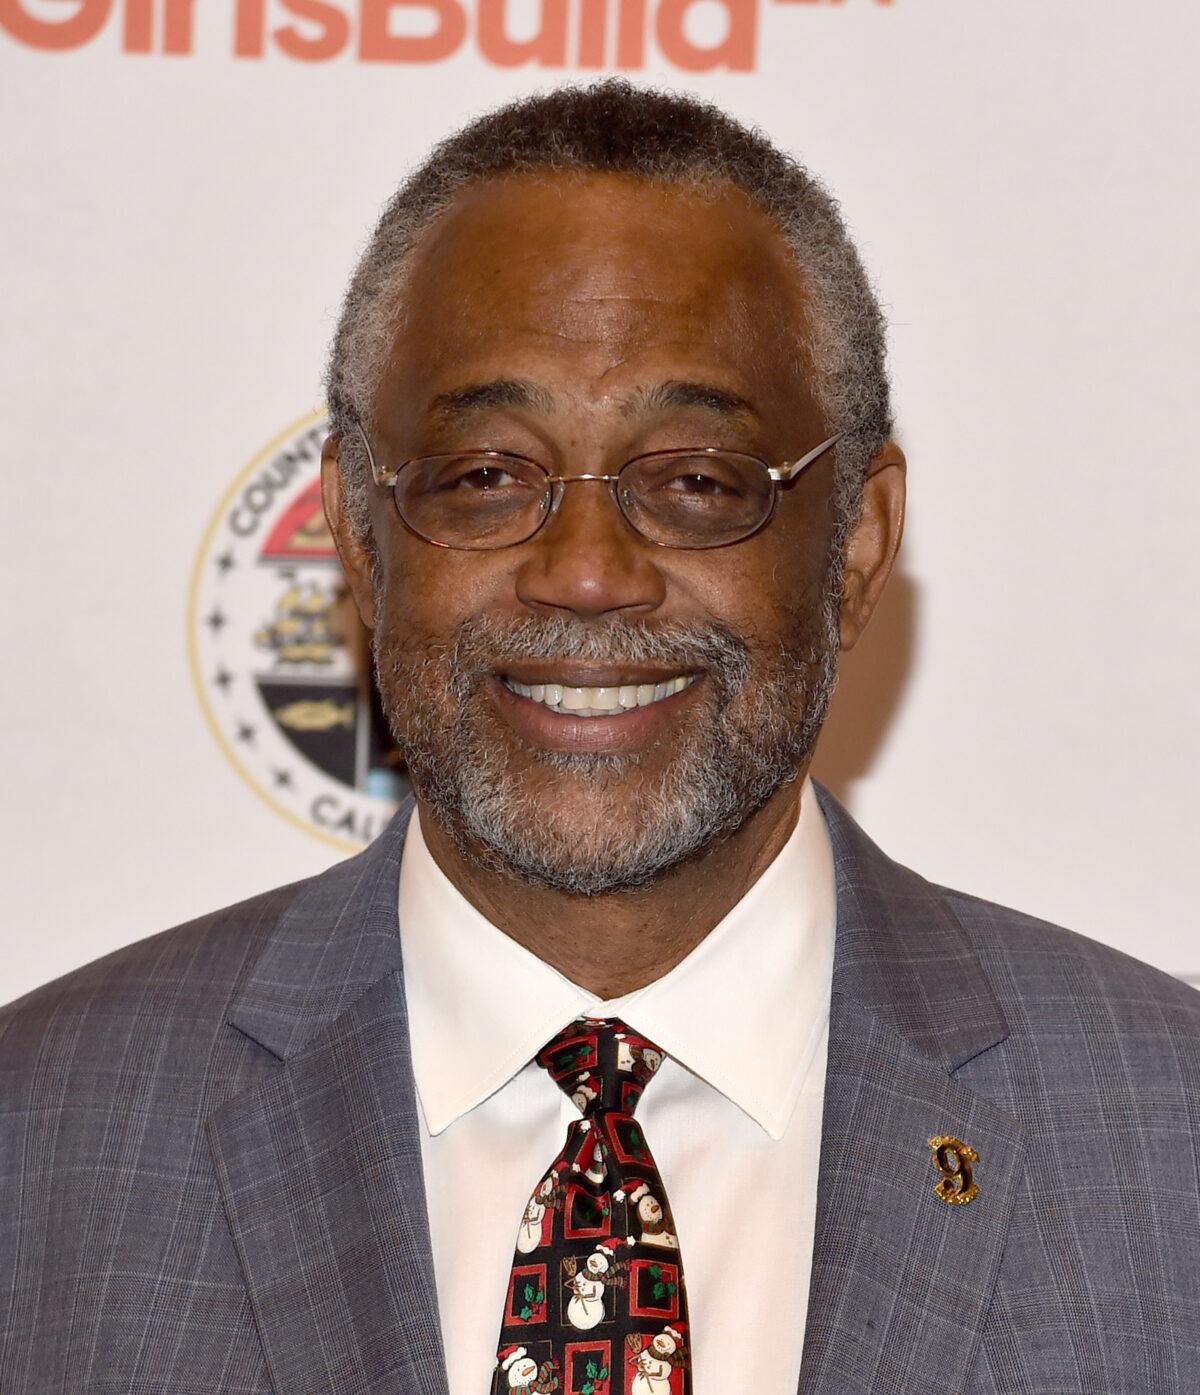 Los Angeles Council Member Curren Price Jr. in a file photograph. (Alberto E. Rodriguez/Getty Images)